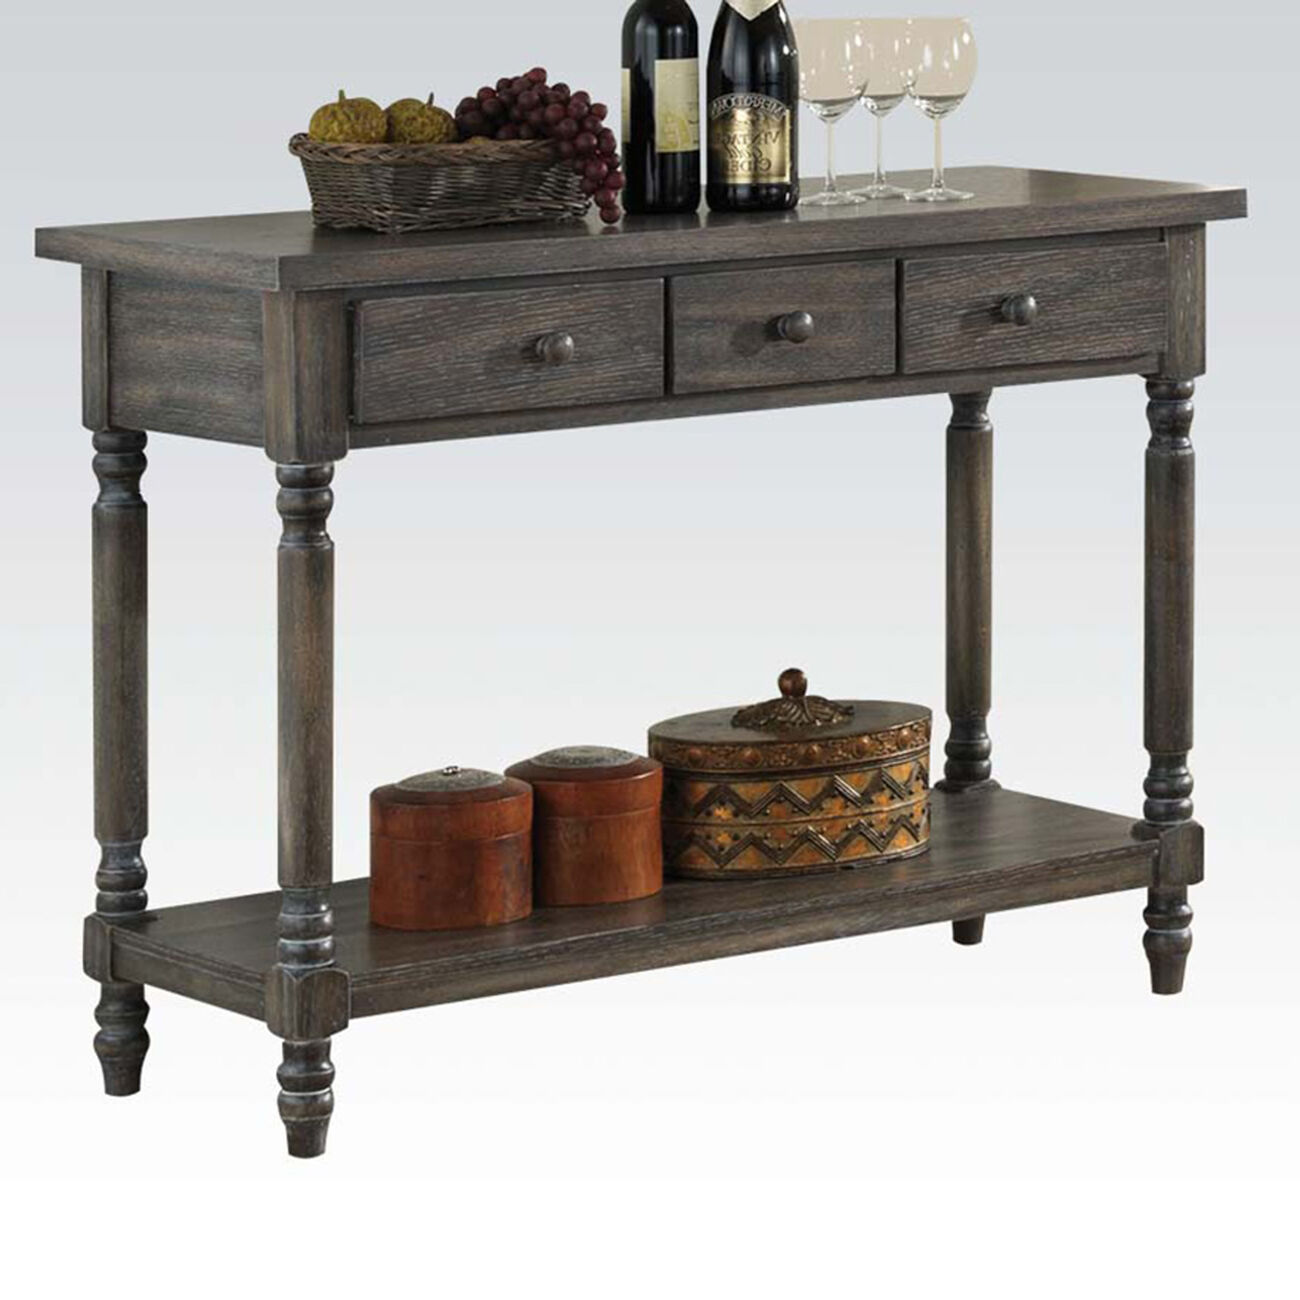 Wooden Rectangular Server with Three Drawers and Open Bottom Shelf, Gray